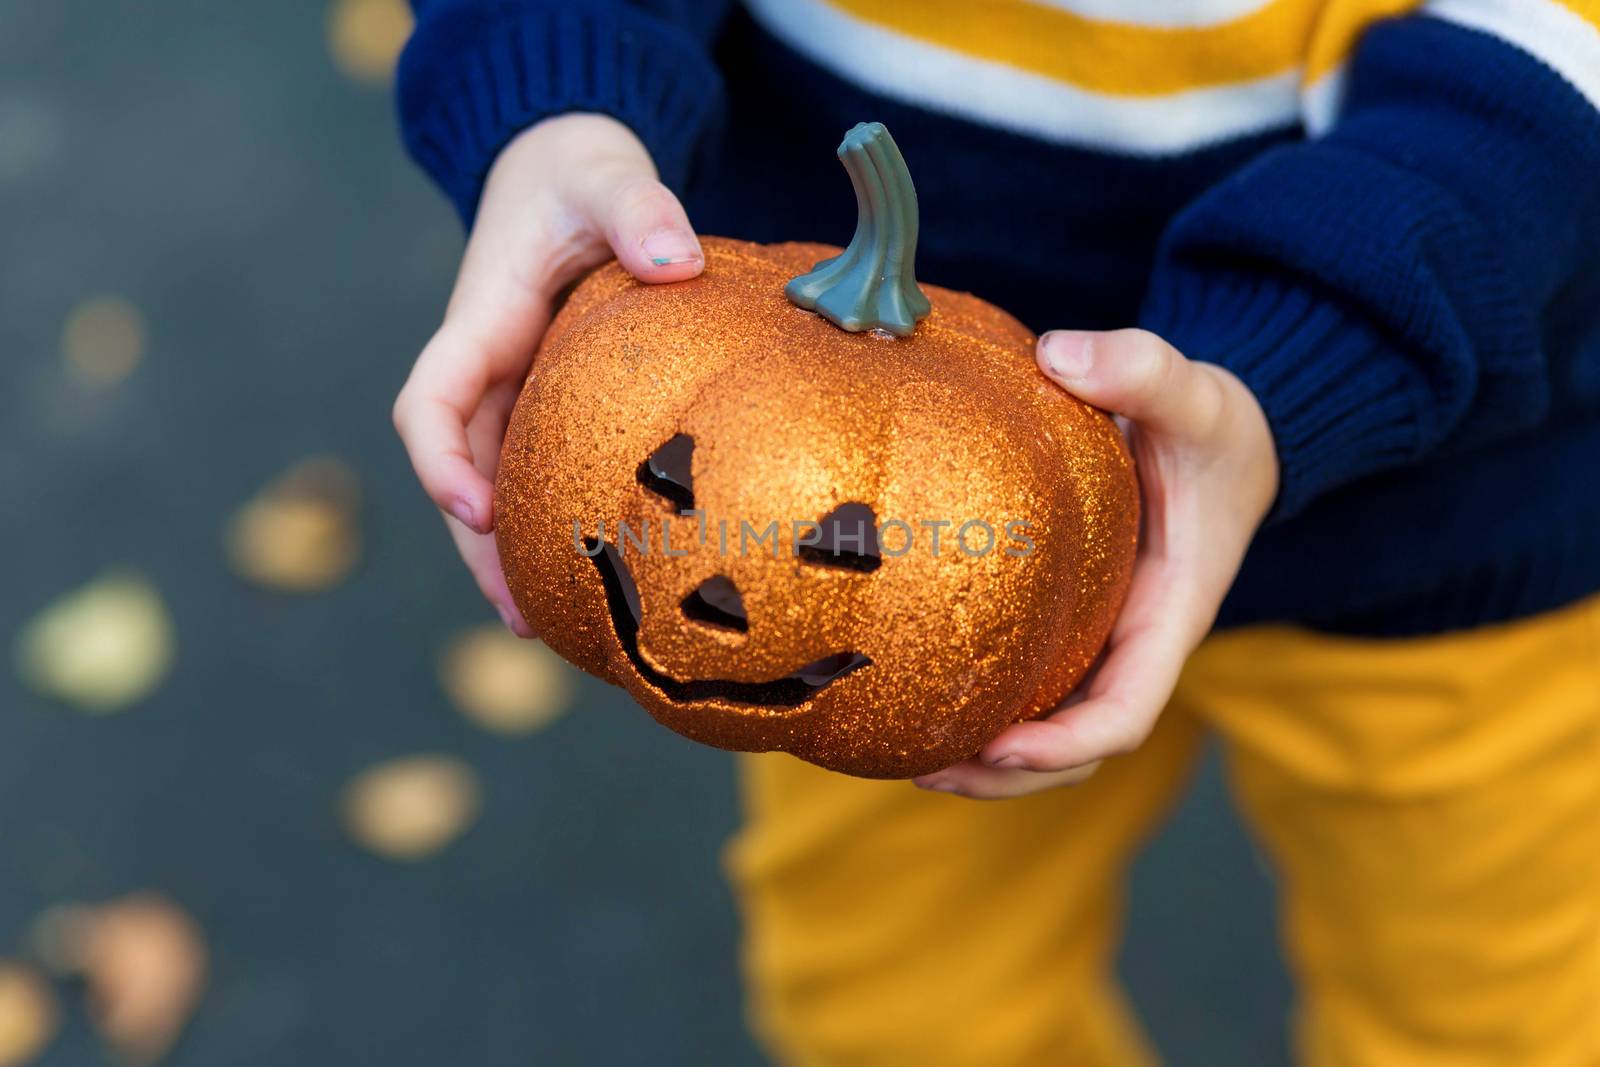 Kid's hands holding a toy pumpkin lantern for the holiday halloween by galinasharapova